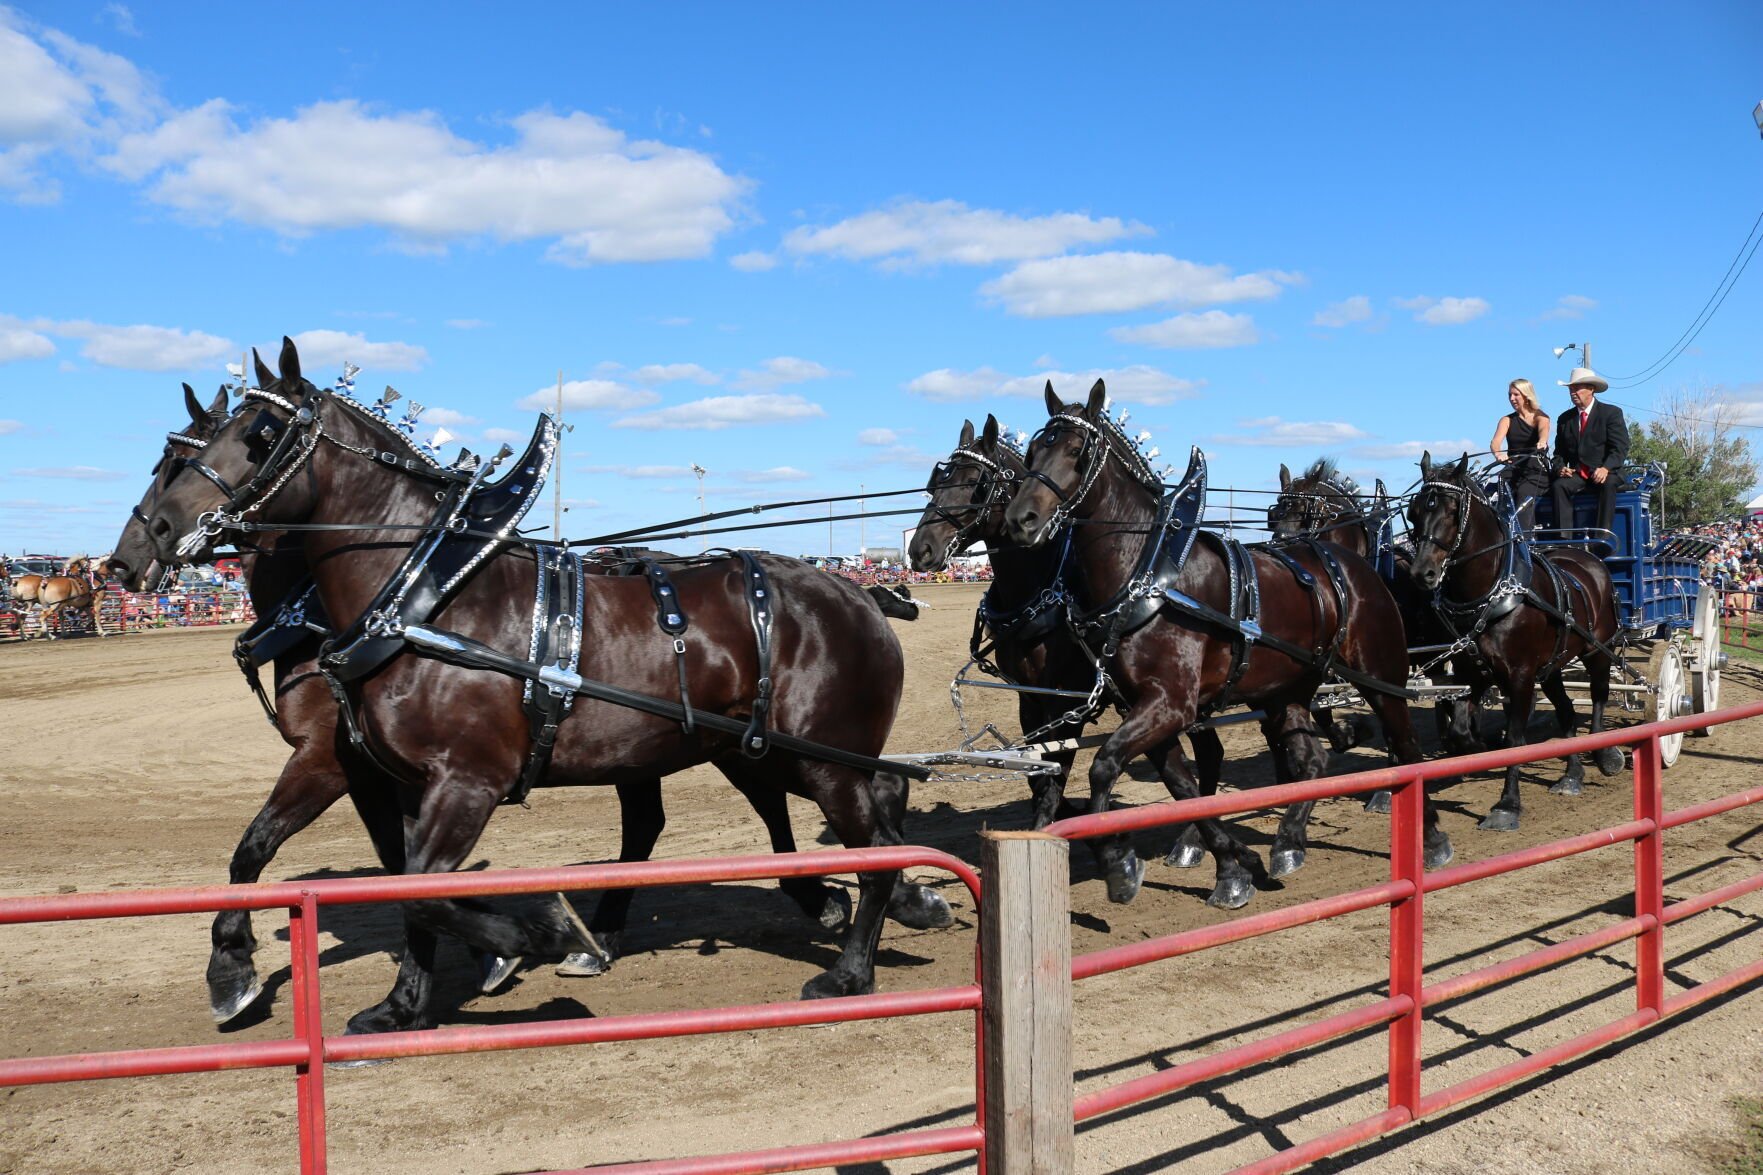 North Americas top draft horses, drivers competed in 41st Britt extravaganza